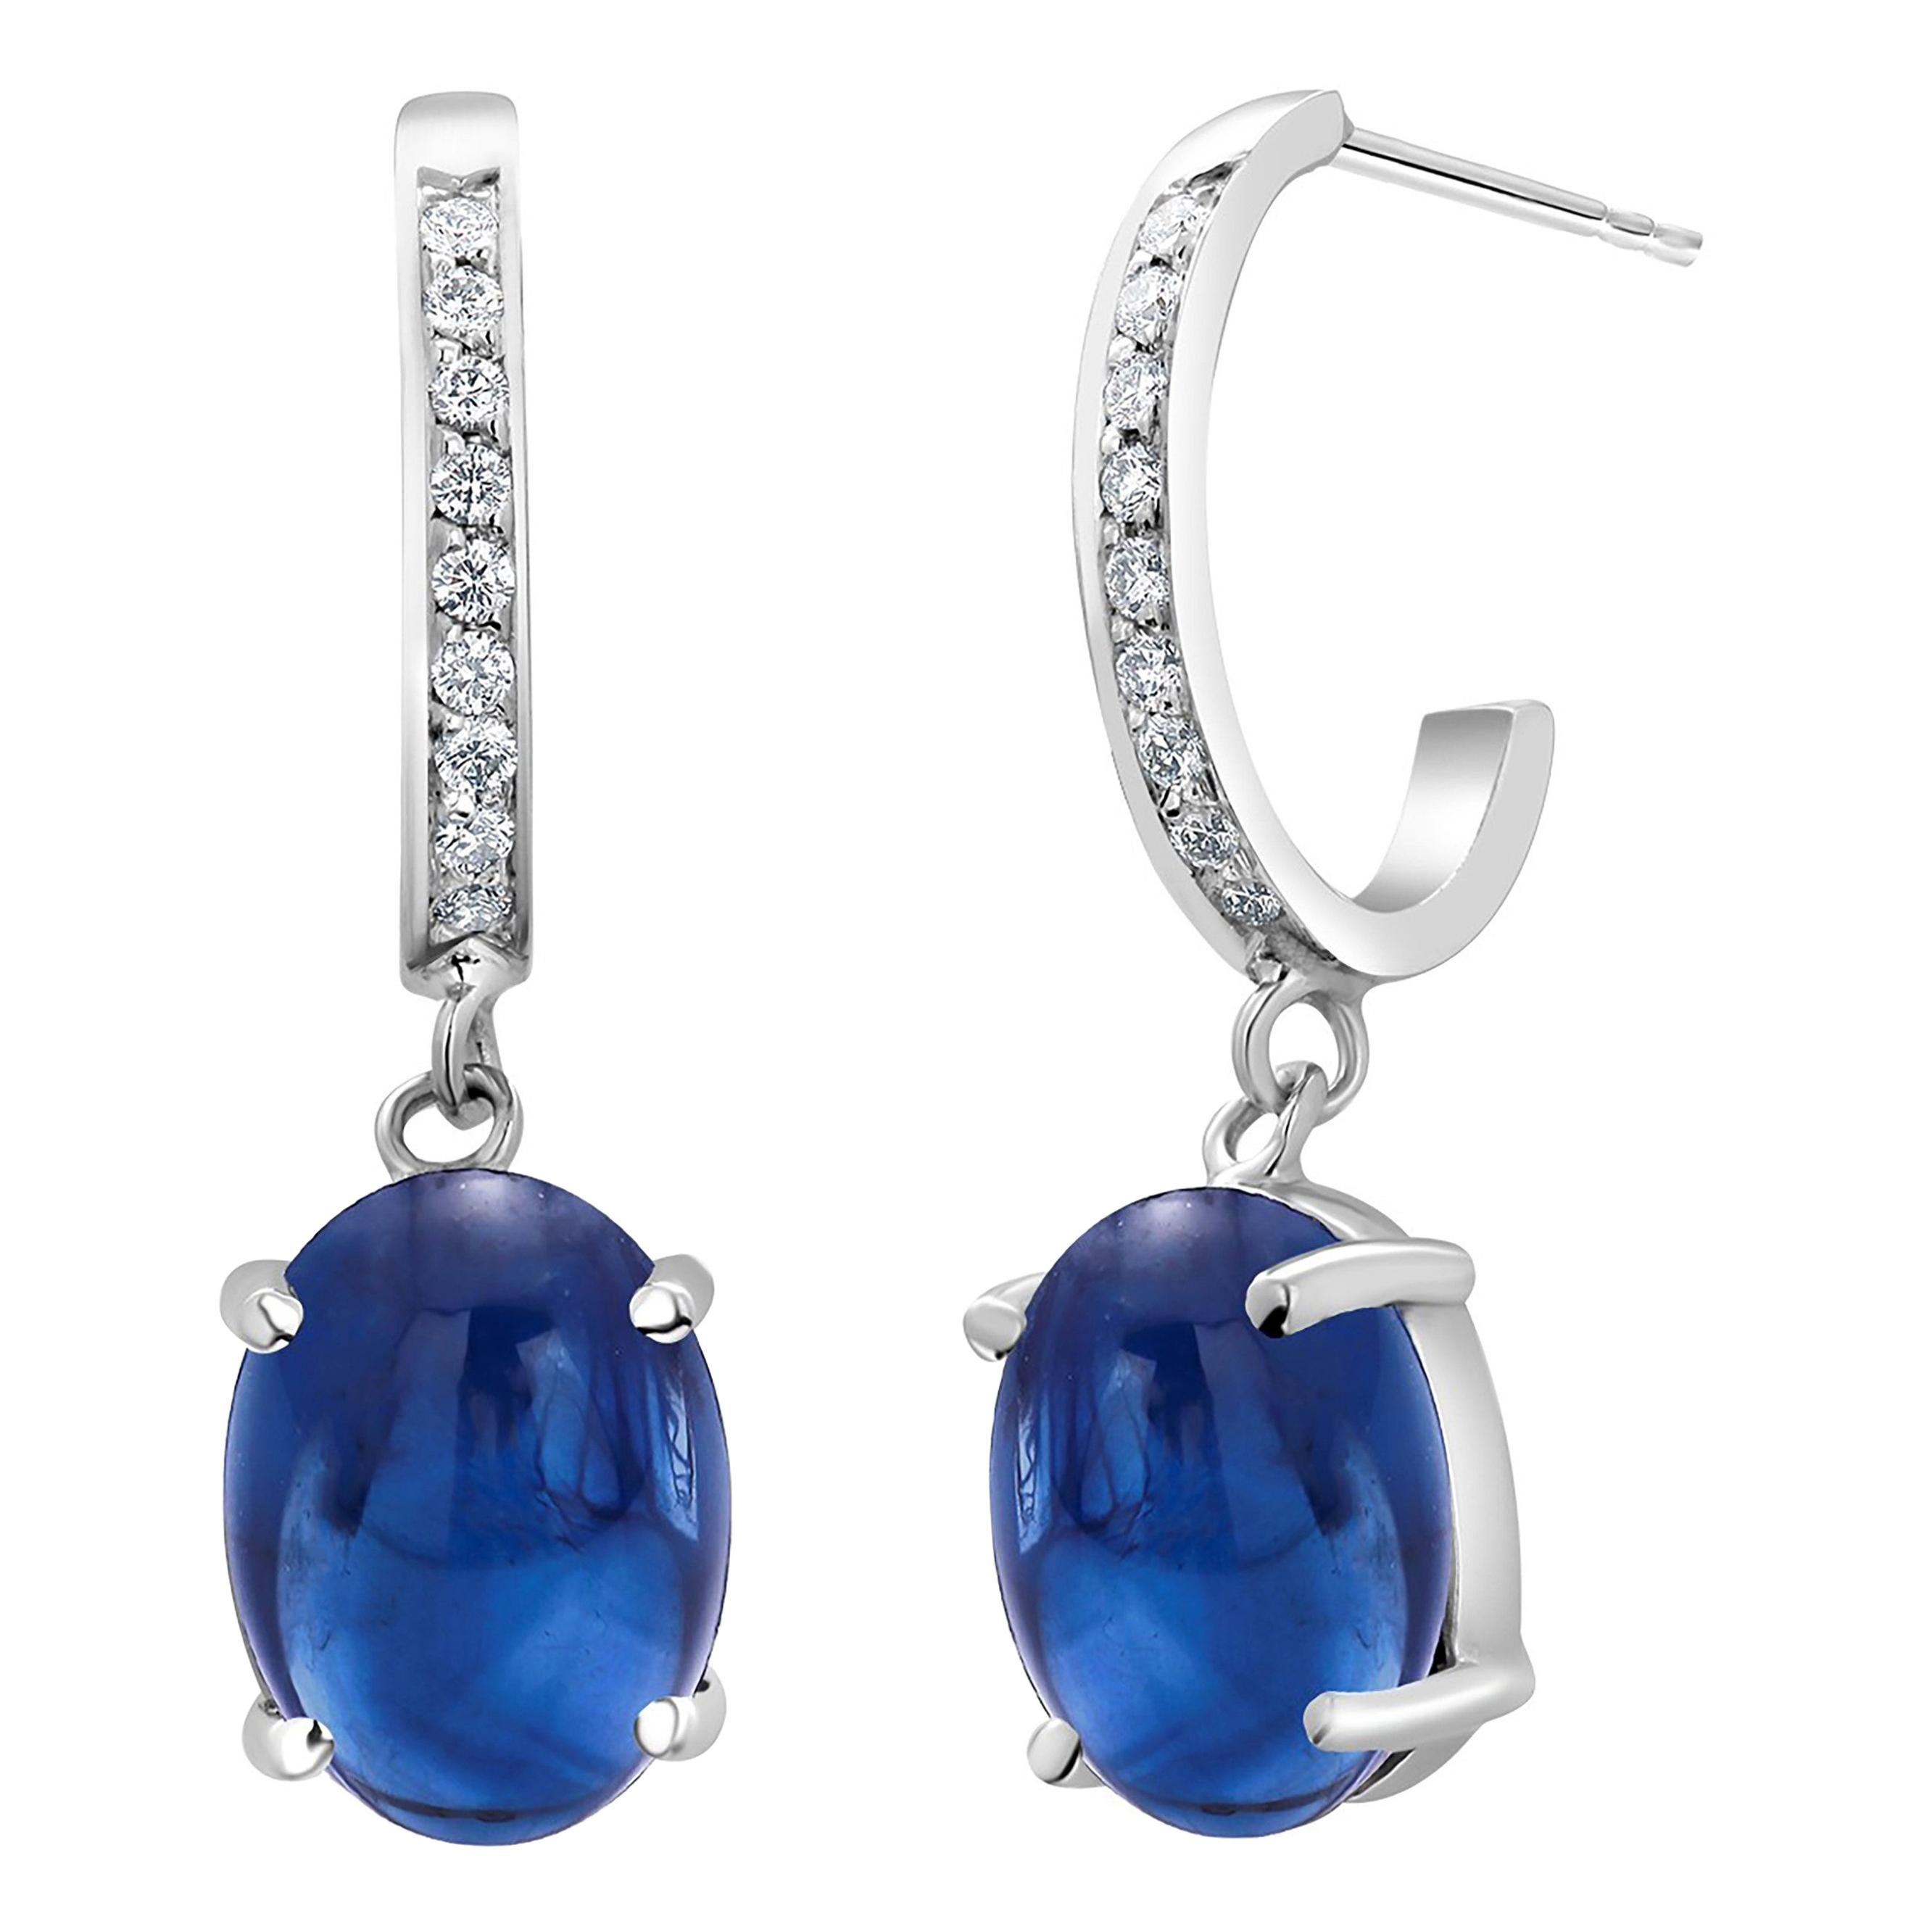 Cabochon Sapphire and Diamond Gold Hoop Earrings Weighing 6.23 Carats